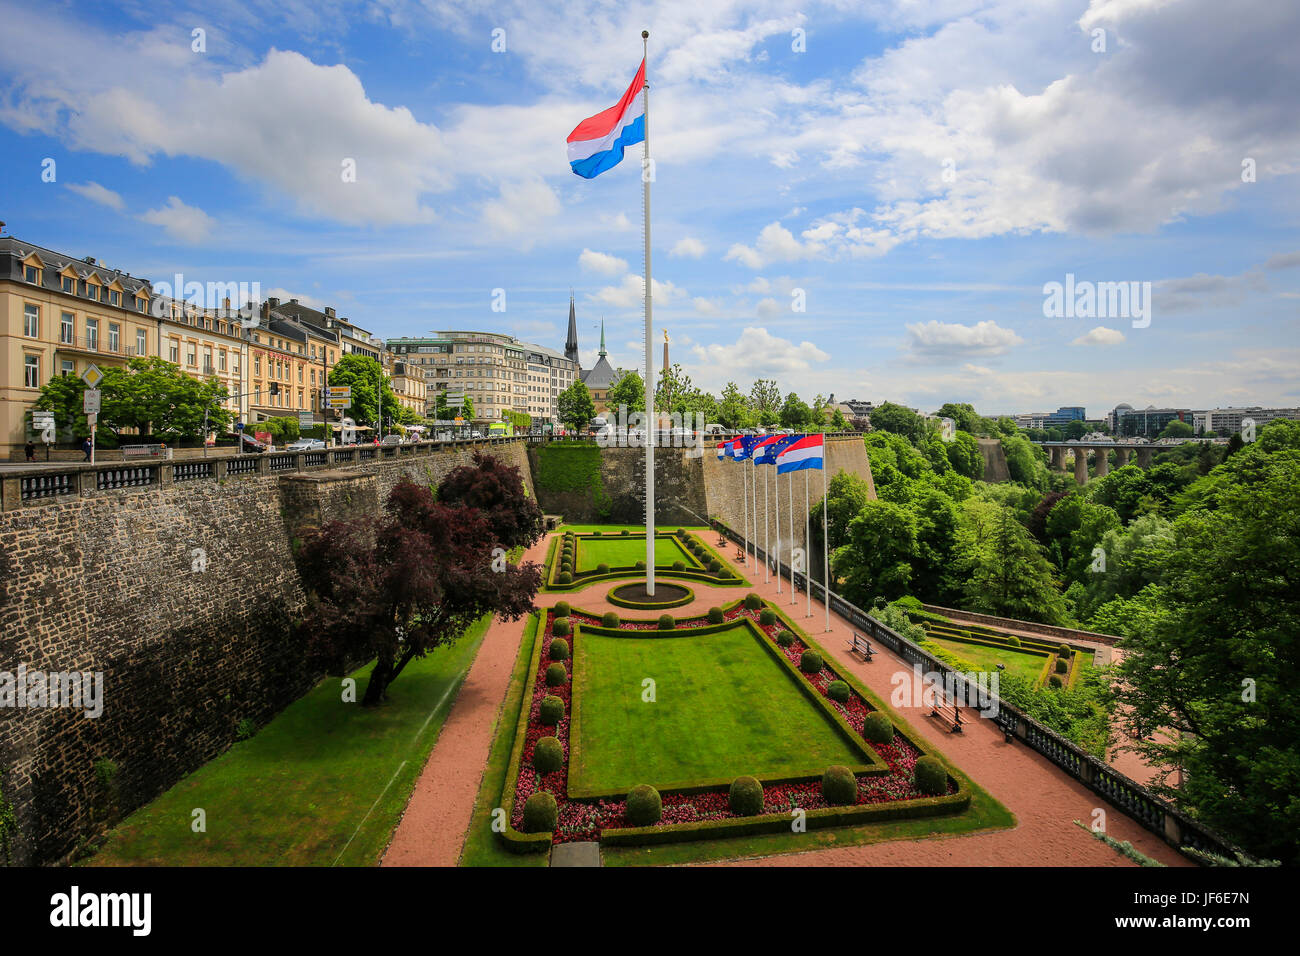 Luxembourg national flag in the Park at the place de la Constitution, Luxembourg City, Grand Duchy of Luxembourg, Europe, Luxemburger Nationalflagge i Stock Photo